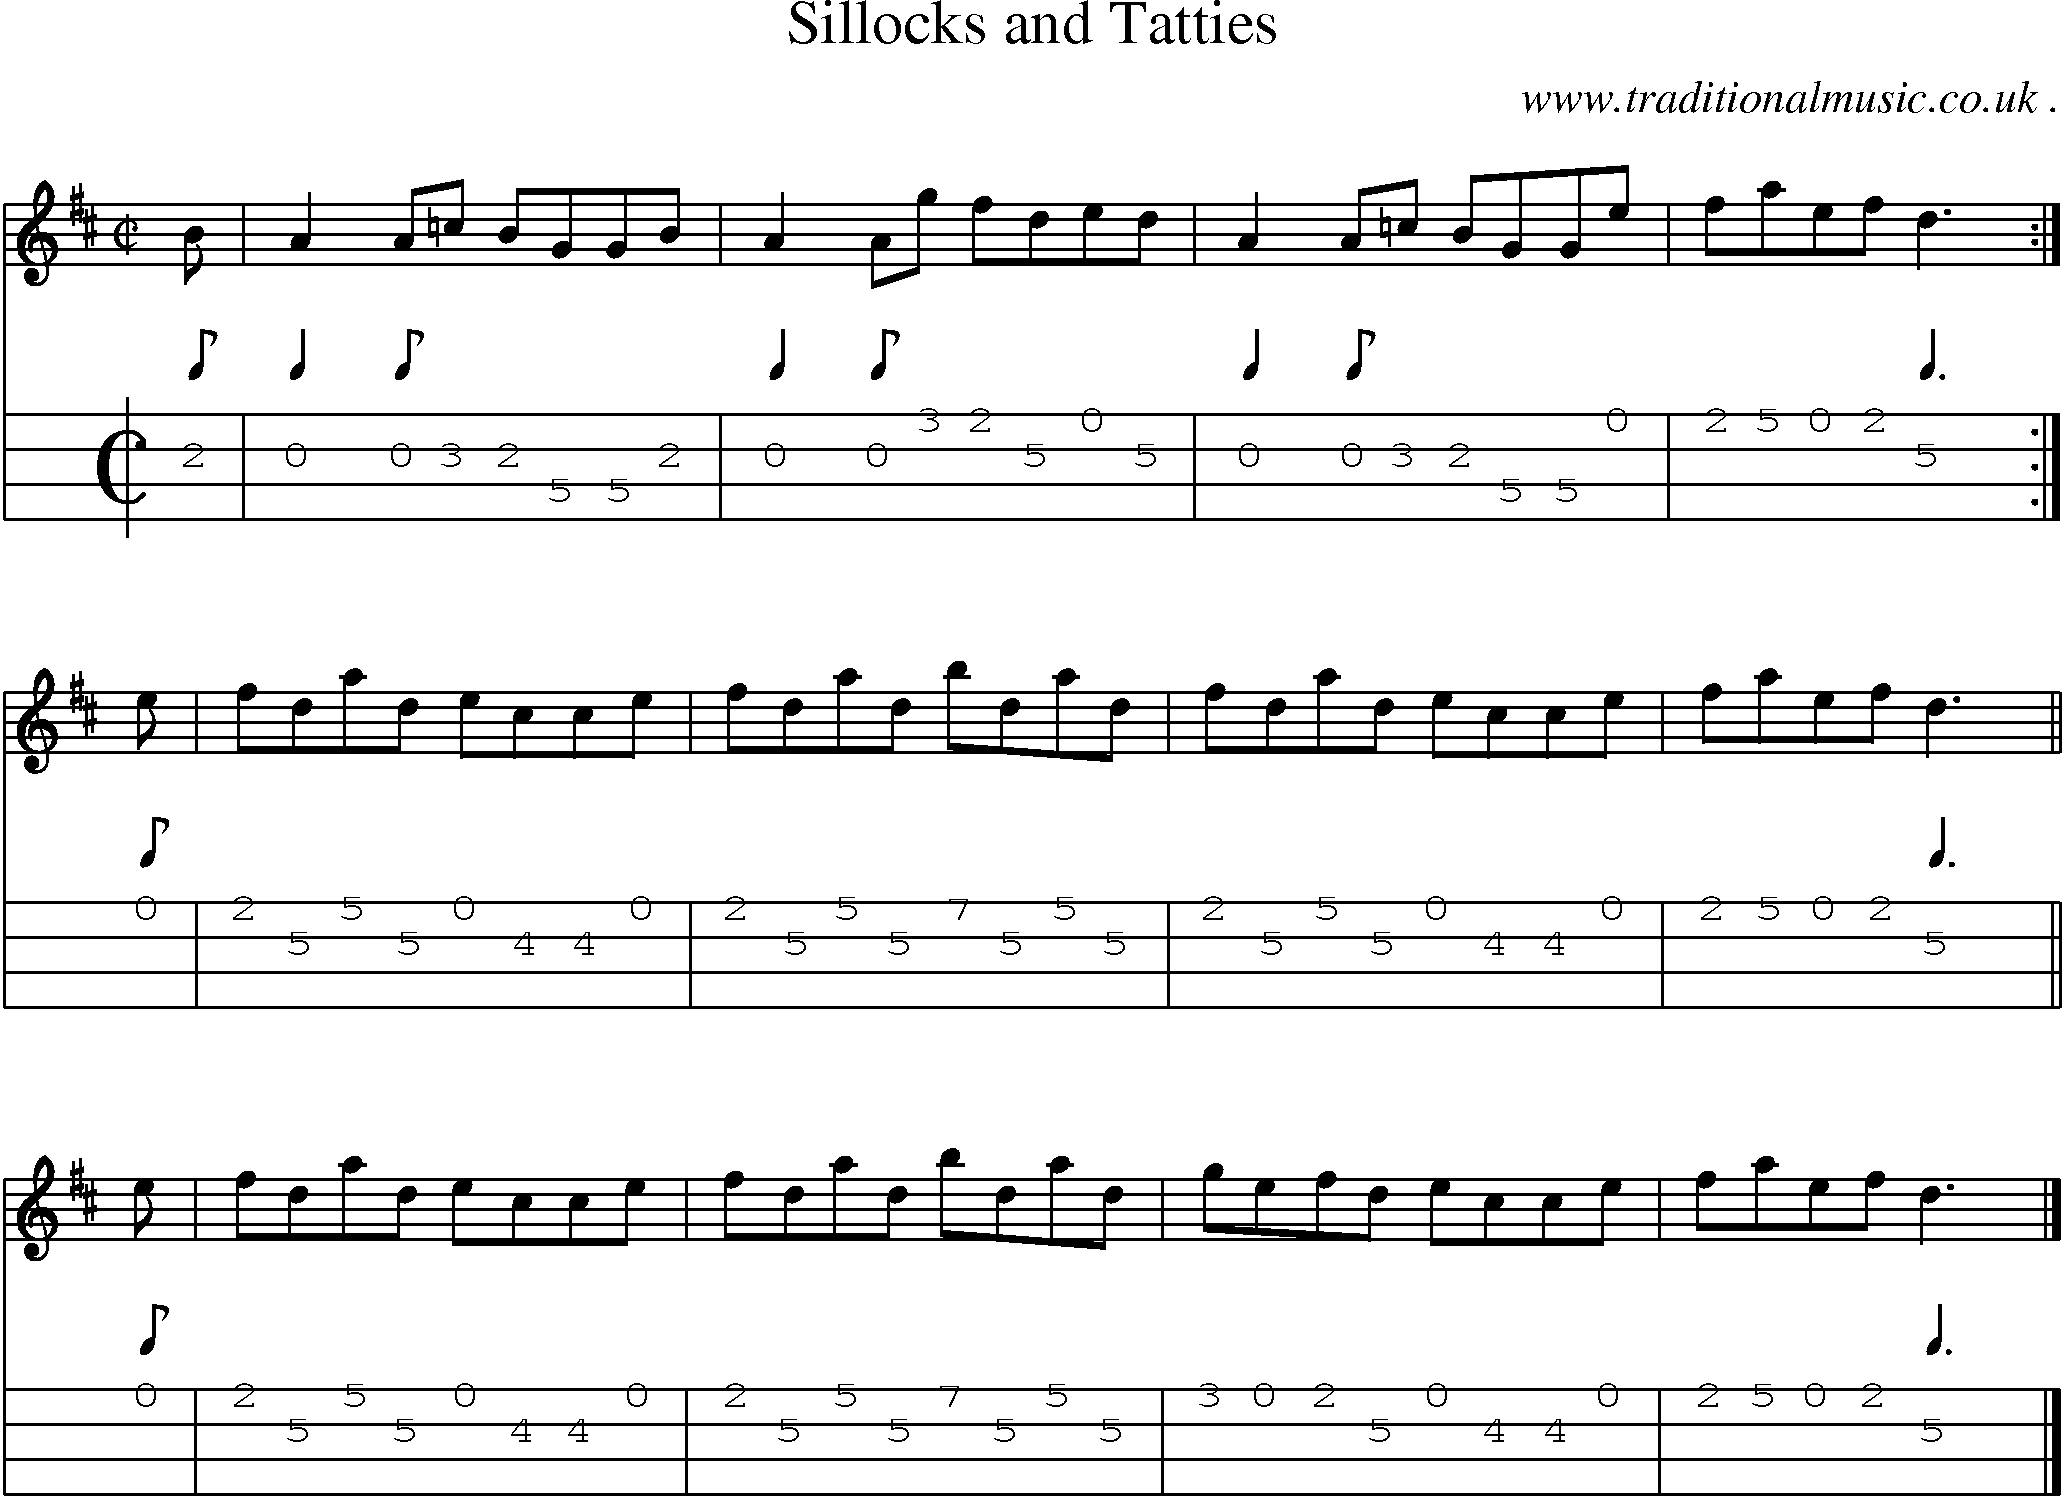 Sheet-music  score, Chords and Mandolin Tabs for Sillocks And Tatties